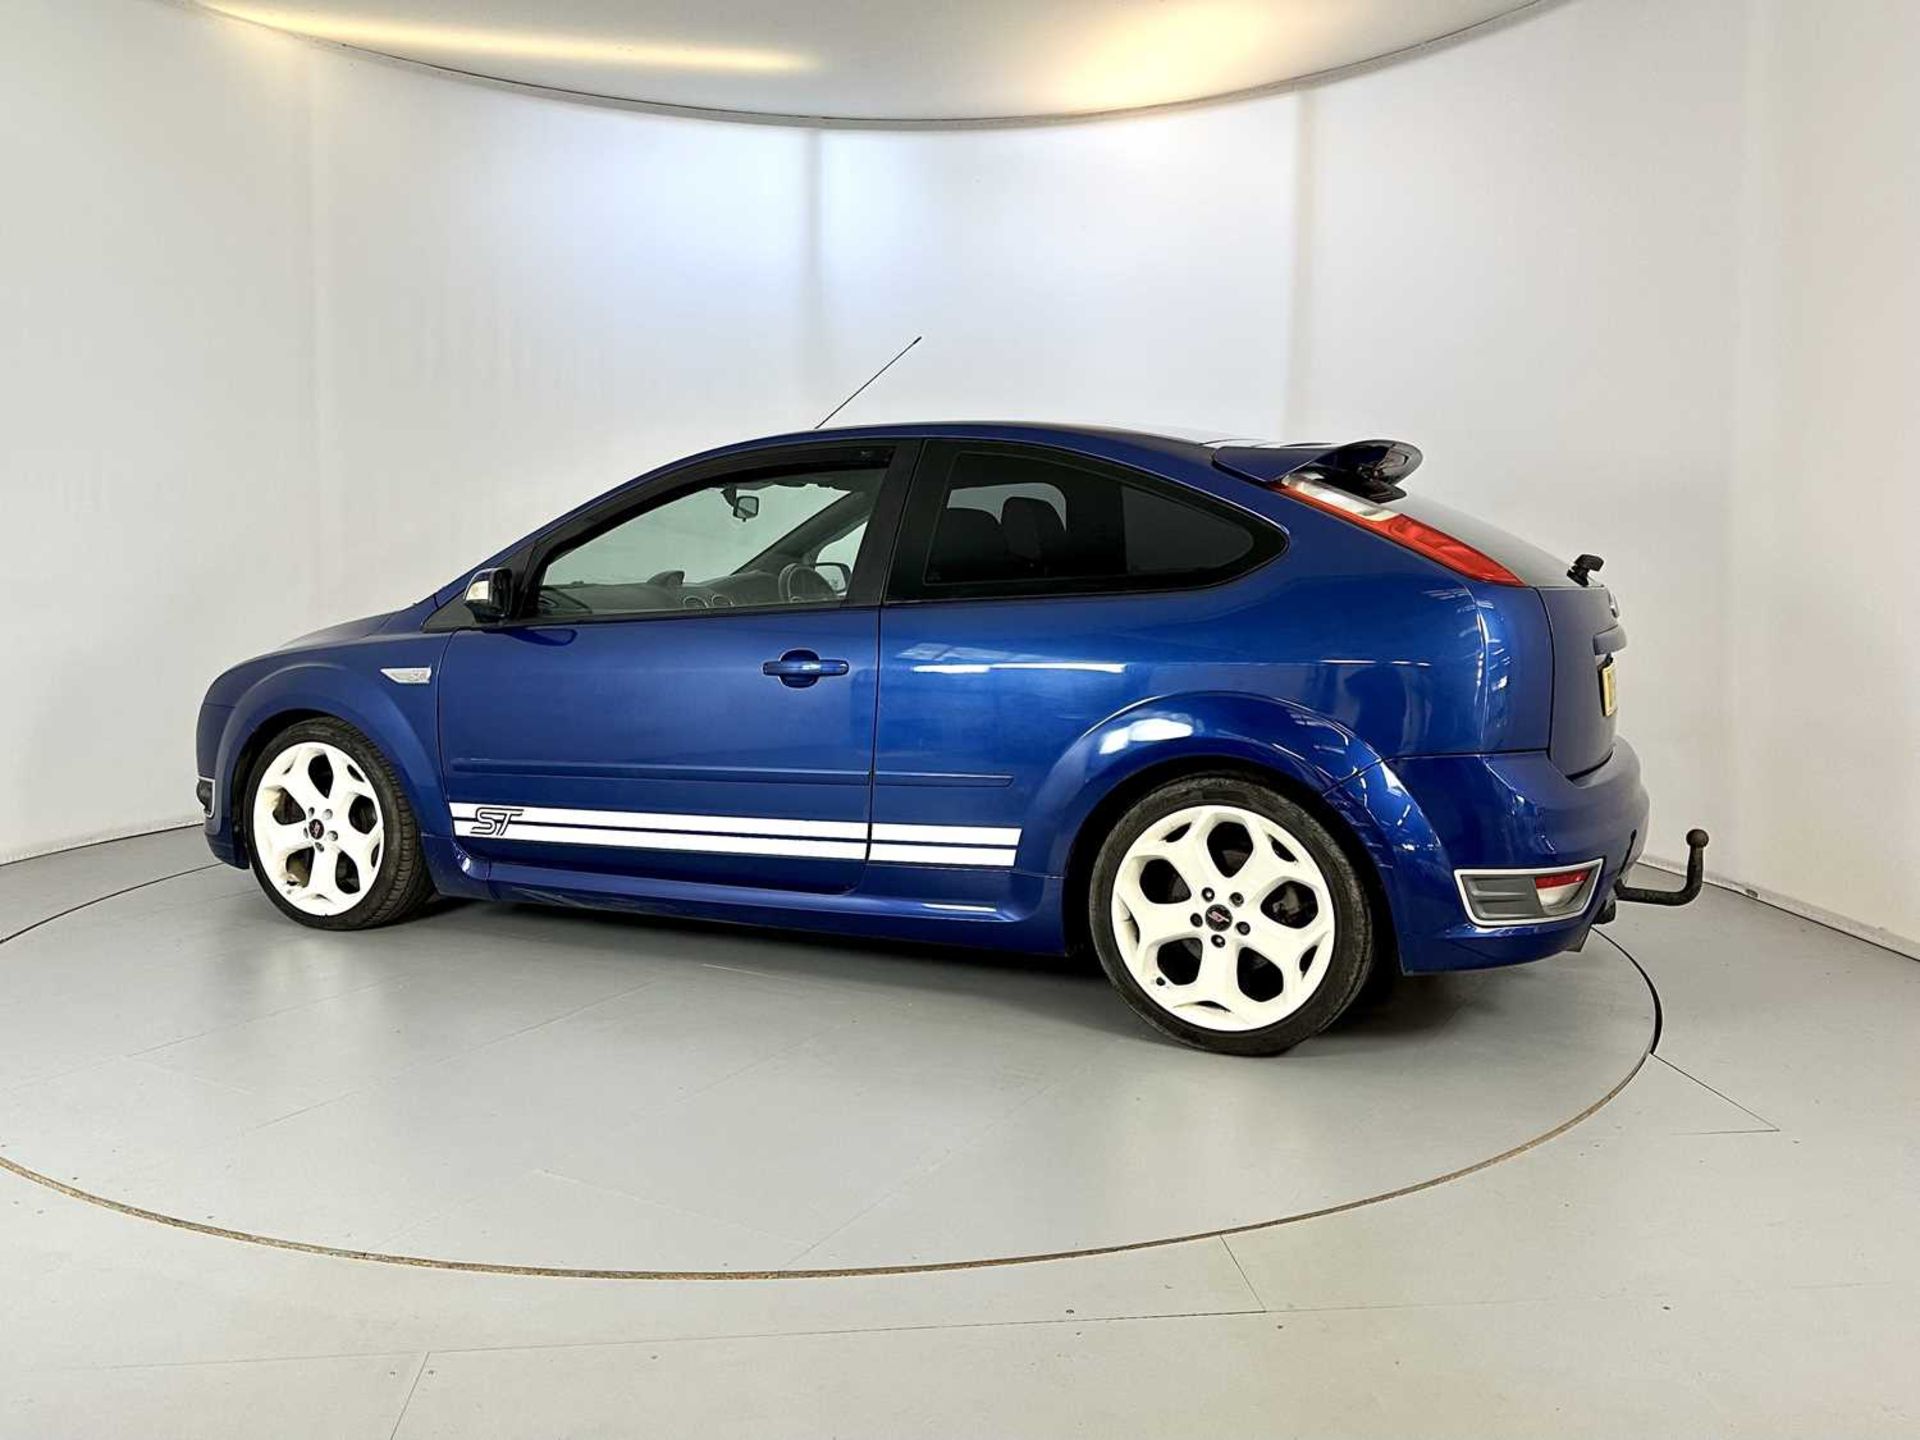 2006 Ford Focus ST - Image 6 of 28